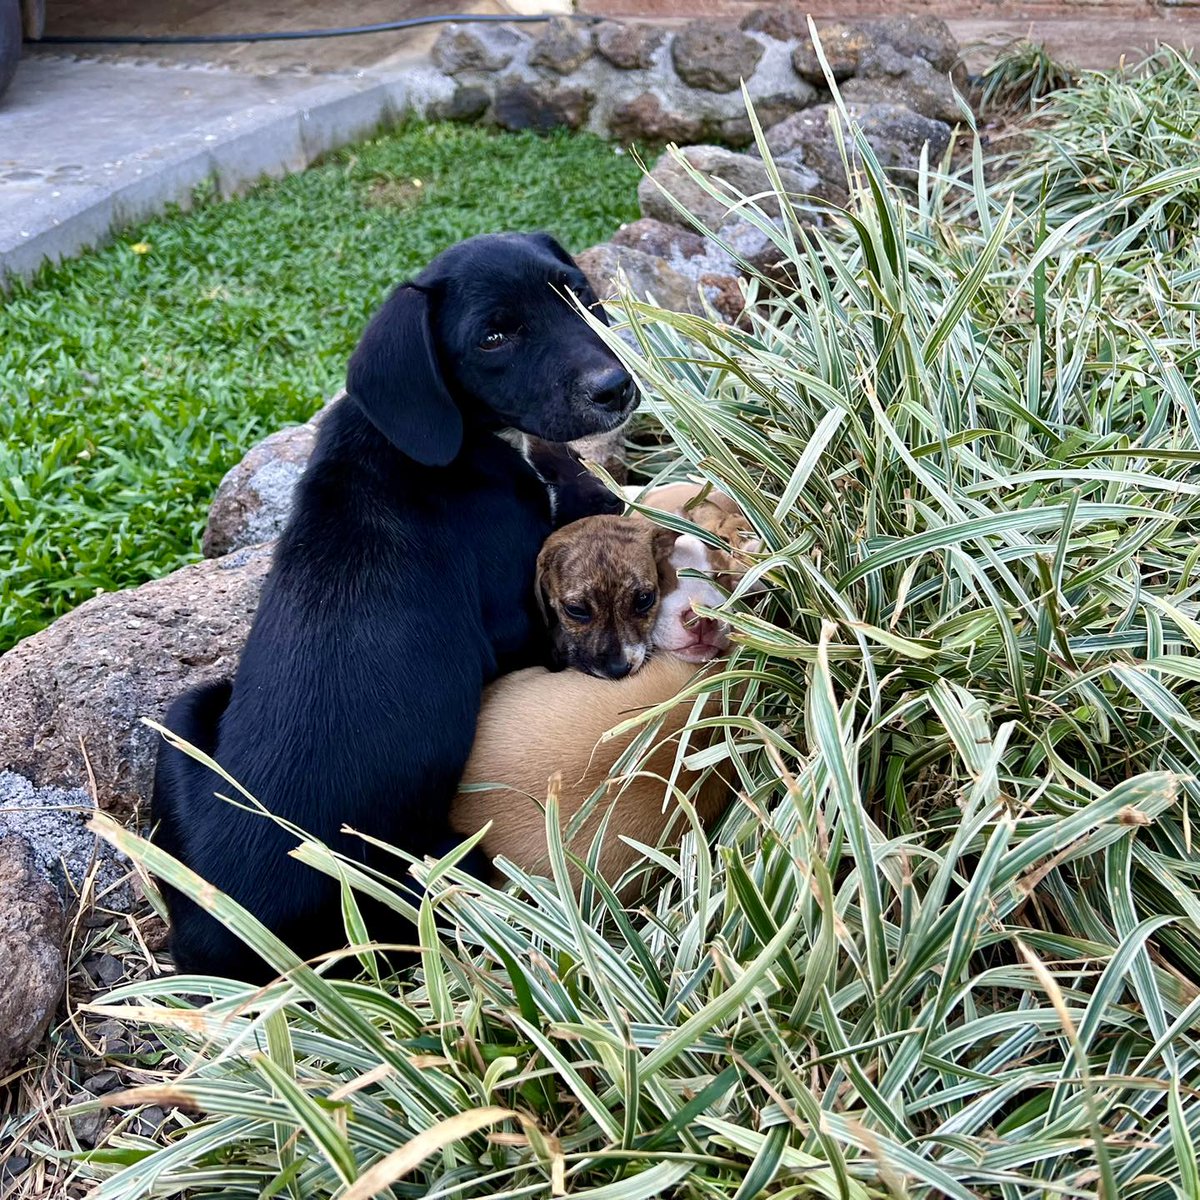 “Álvaro caught us among the garden plants… If someone asks, we’ll just say some whirlwind threw us in here…”

#LifeAtLandOfTheStrays